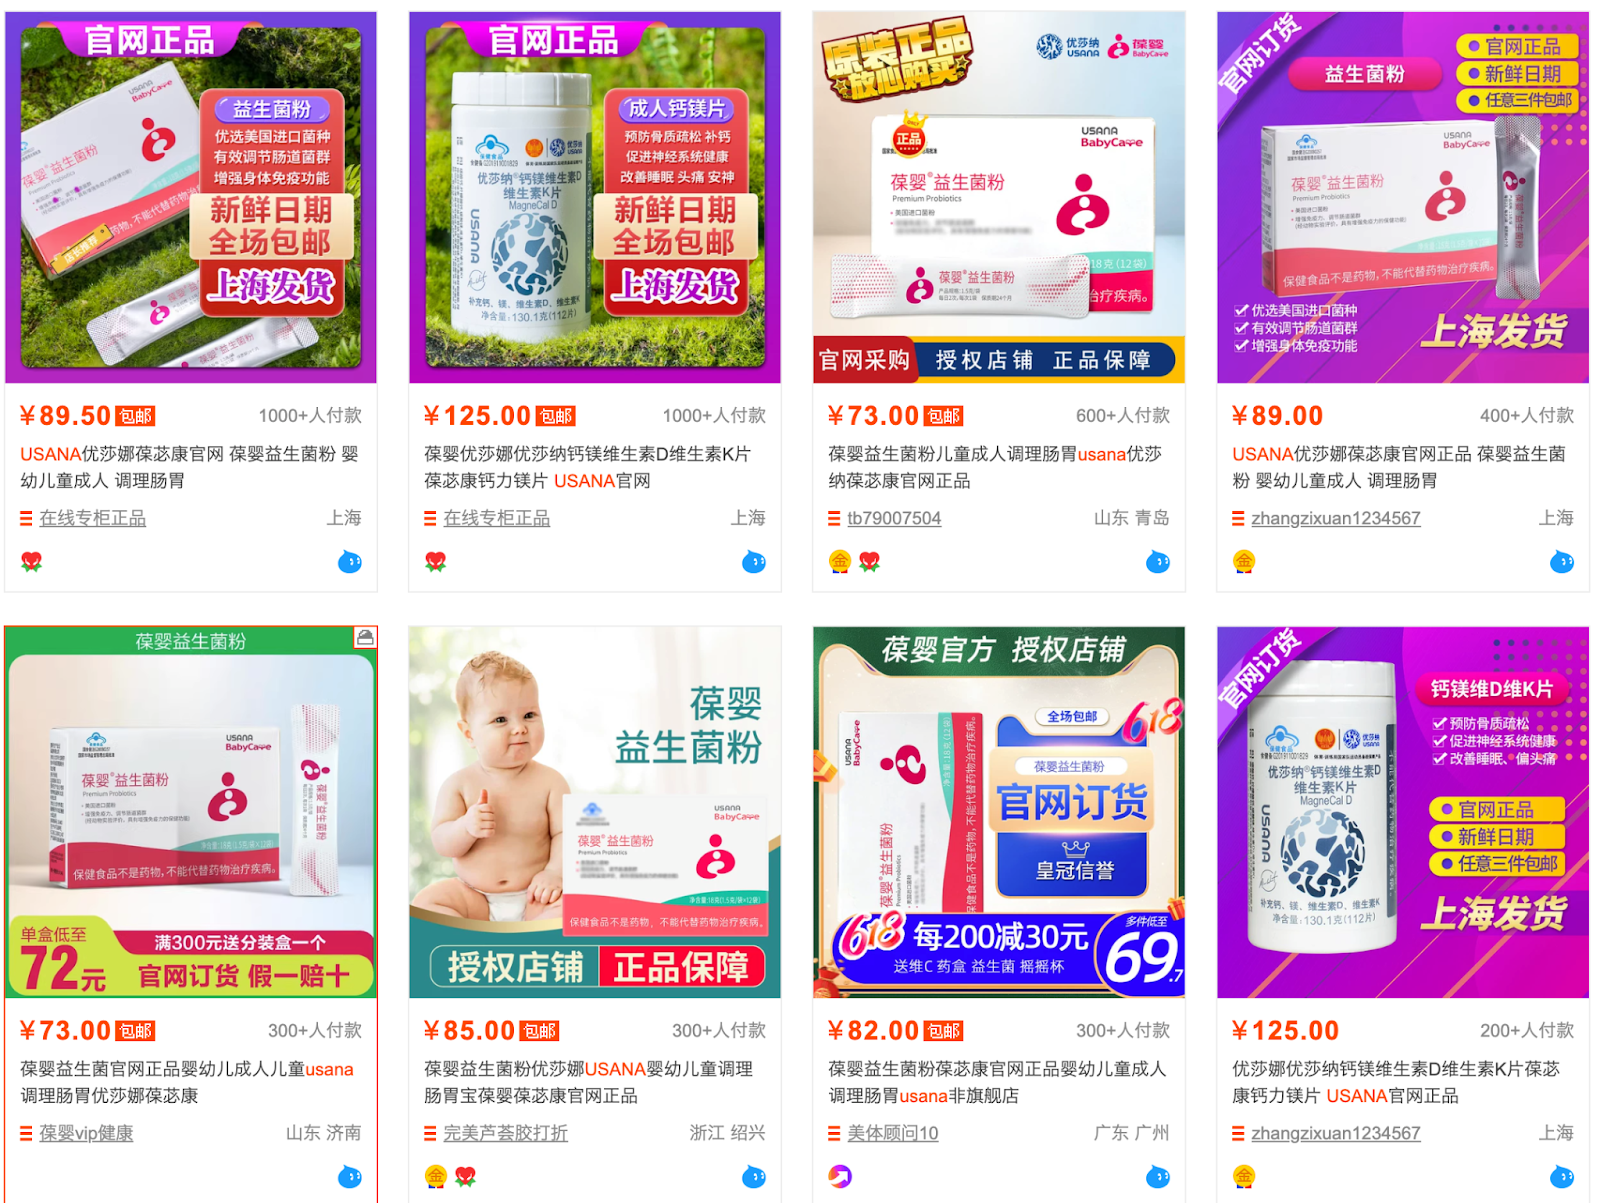 USANA products selling on Taobao